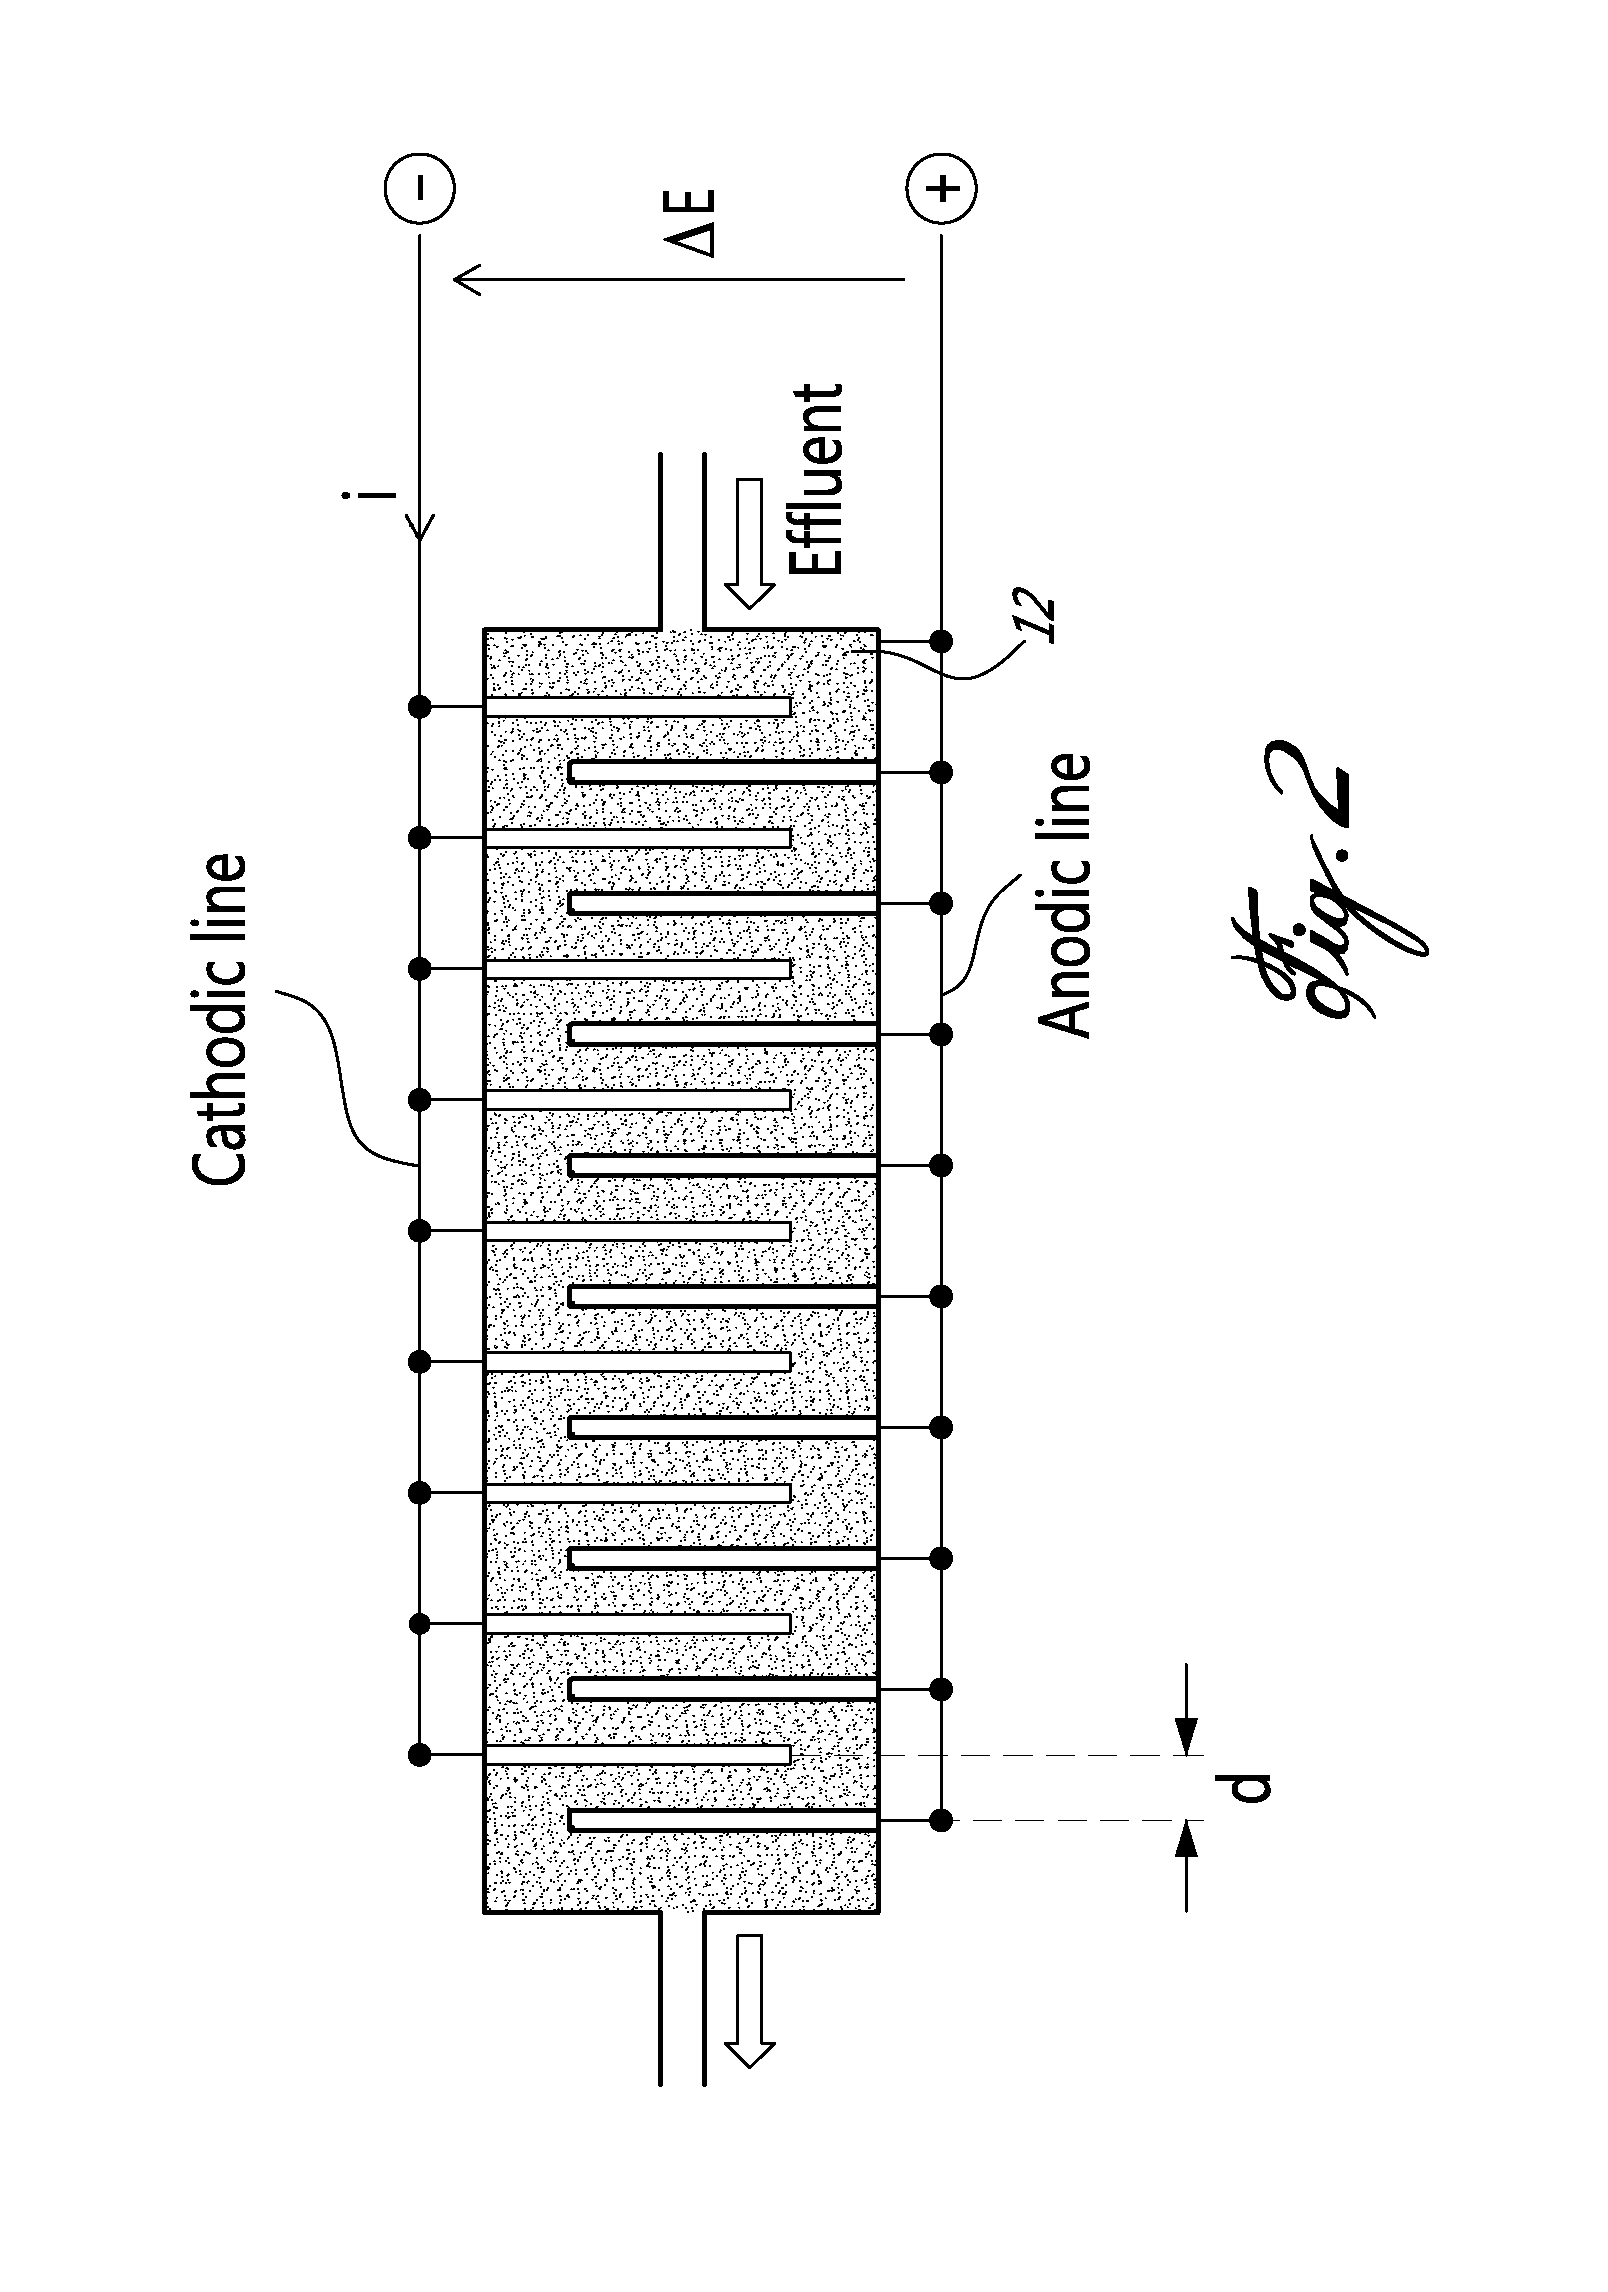 Method and system for electrochemical removal of nitrate and ammonia